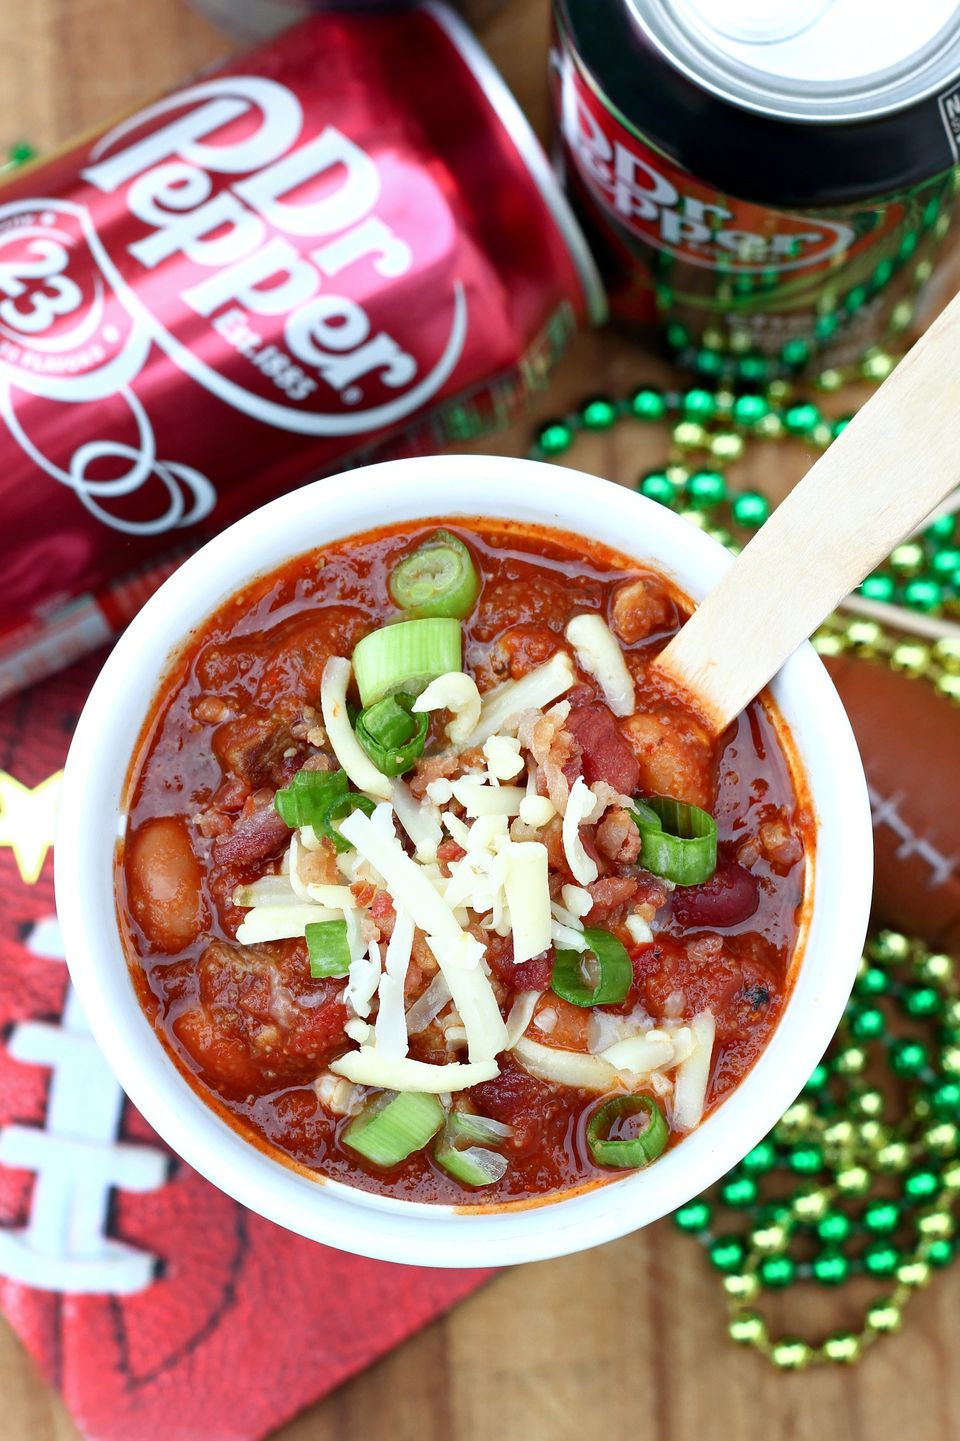 Dr. Pepper Game Day Chili